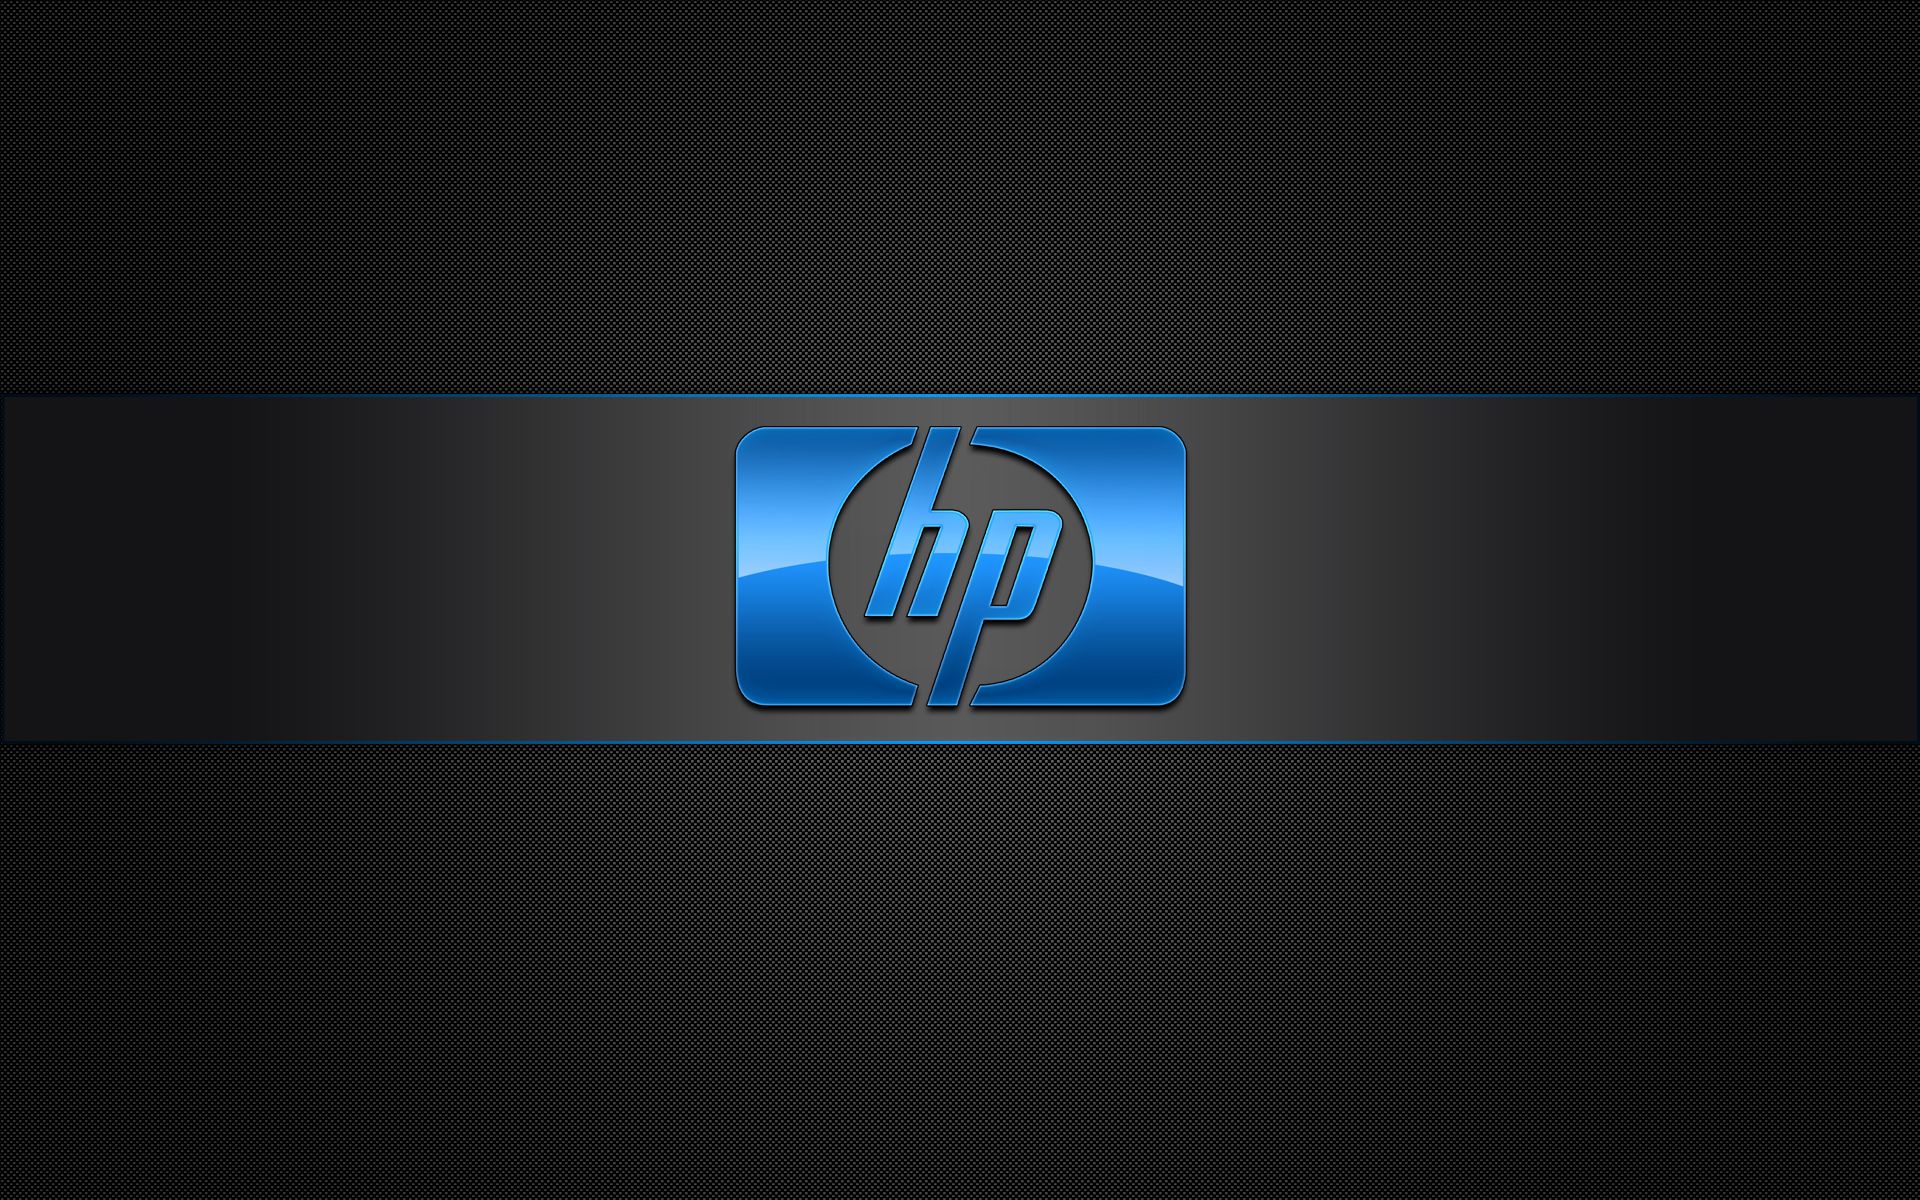 HP 3D Wallpapers For Desktop And Mobile | Ultra HD Free Download HP 3D  Wallpapers - FancyOdds